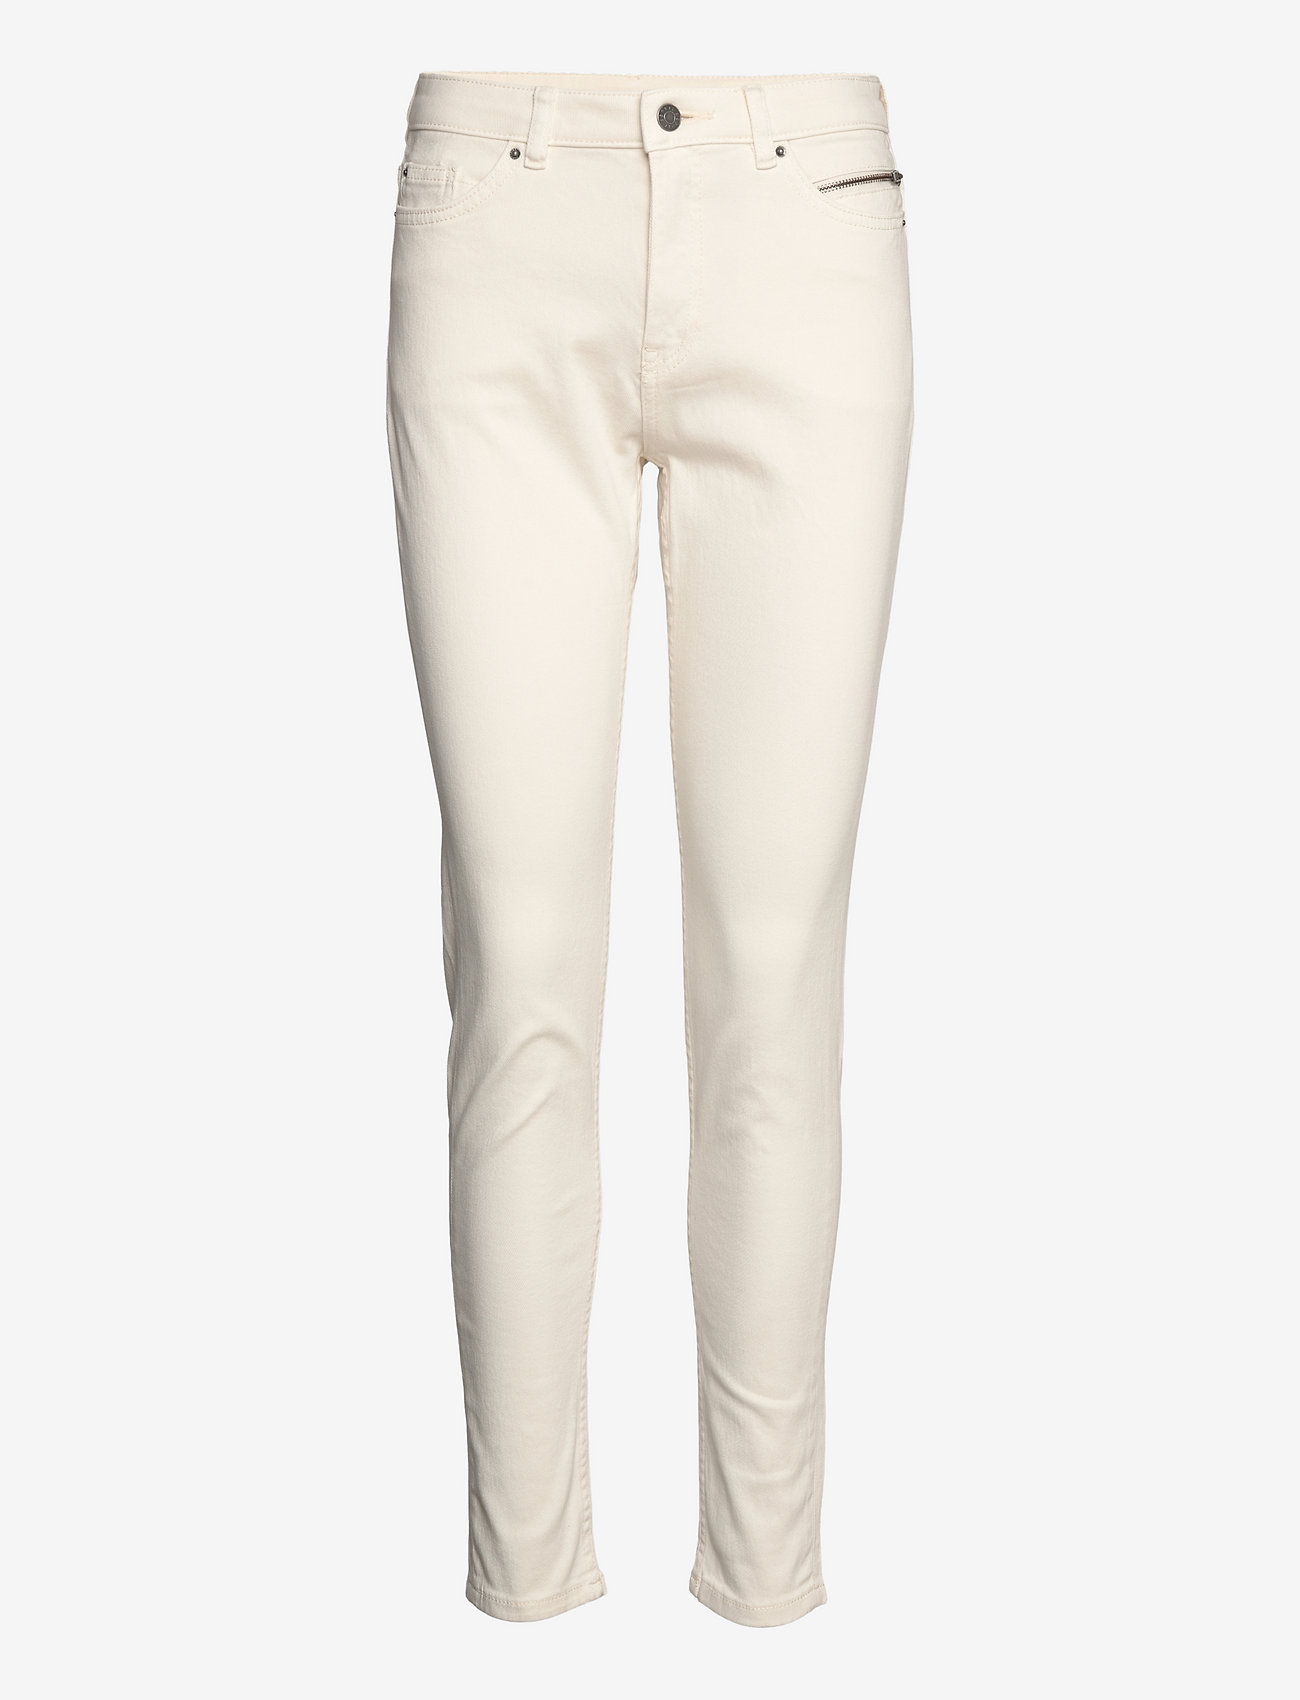 Esprit Casual - Stretch trousers with zip detail - slim jeans - off white - 0